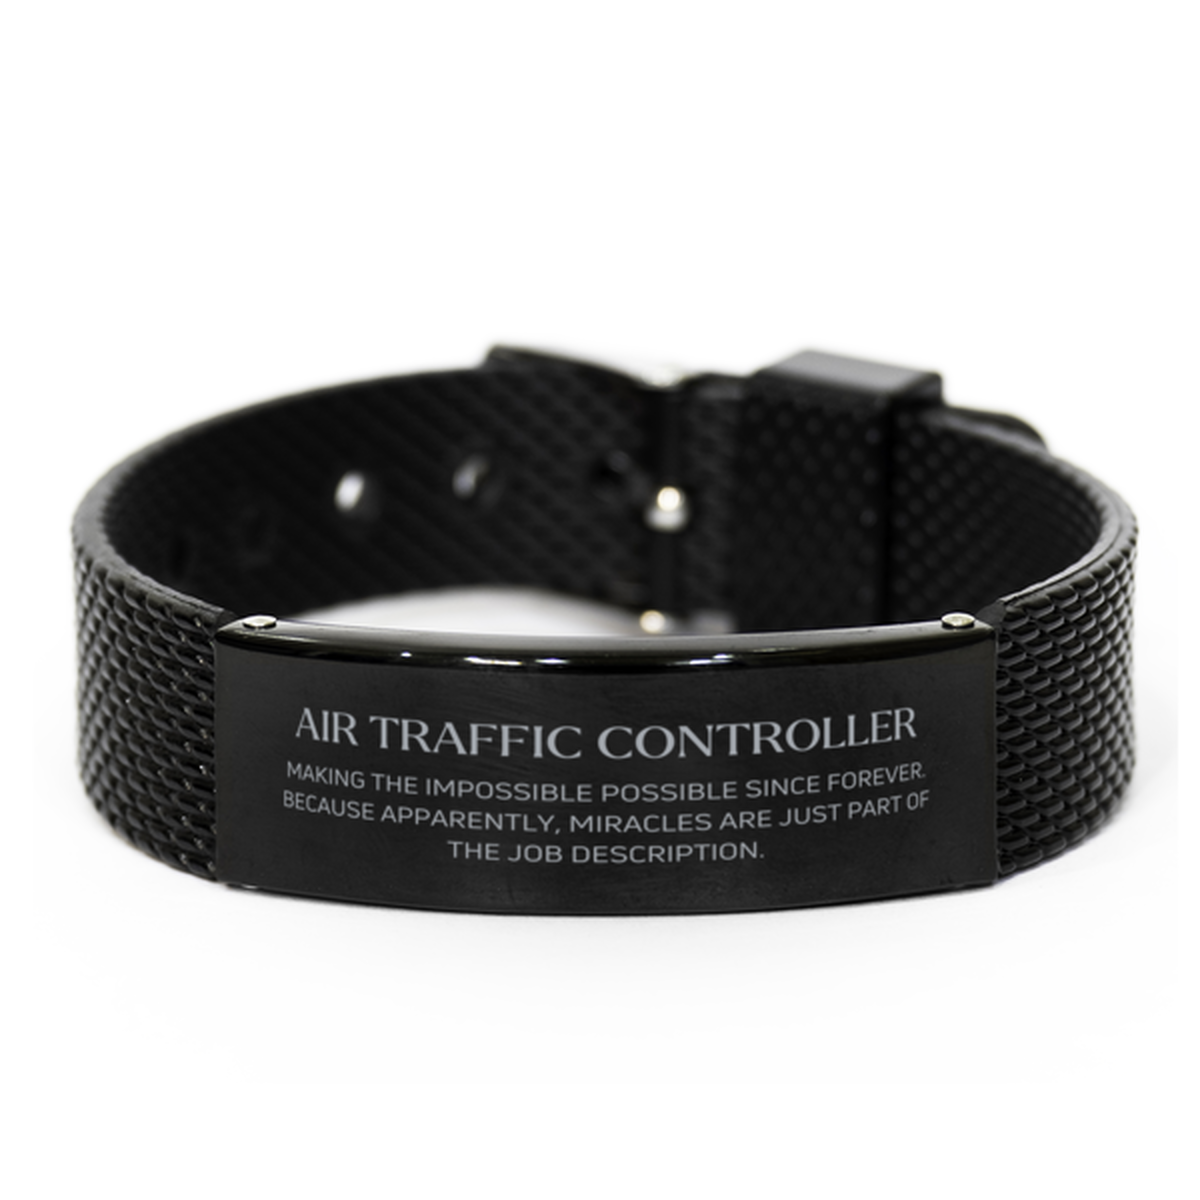 Funny Air Traffic Controller Gifts, Miracles are just part of the job description, Inspirational Birthday Black Shark Mesh Bracelet For Air Traffic Controller, Men, Women, Coworkers, Friends, Boss